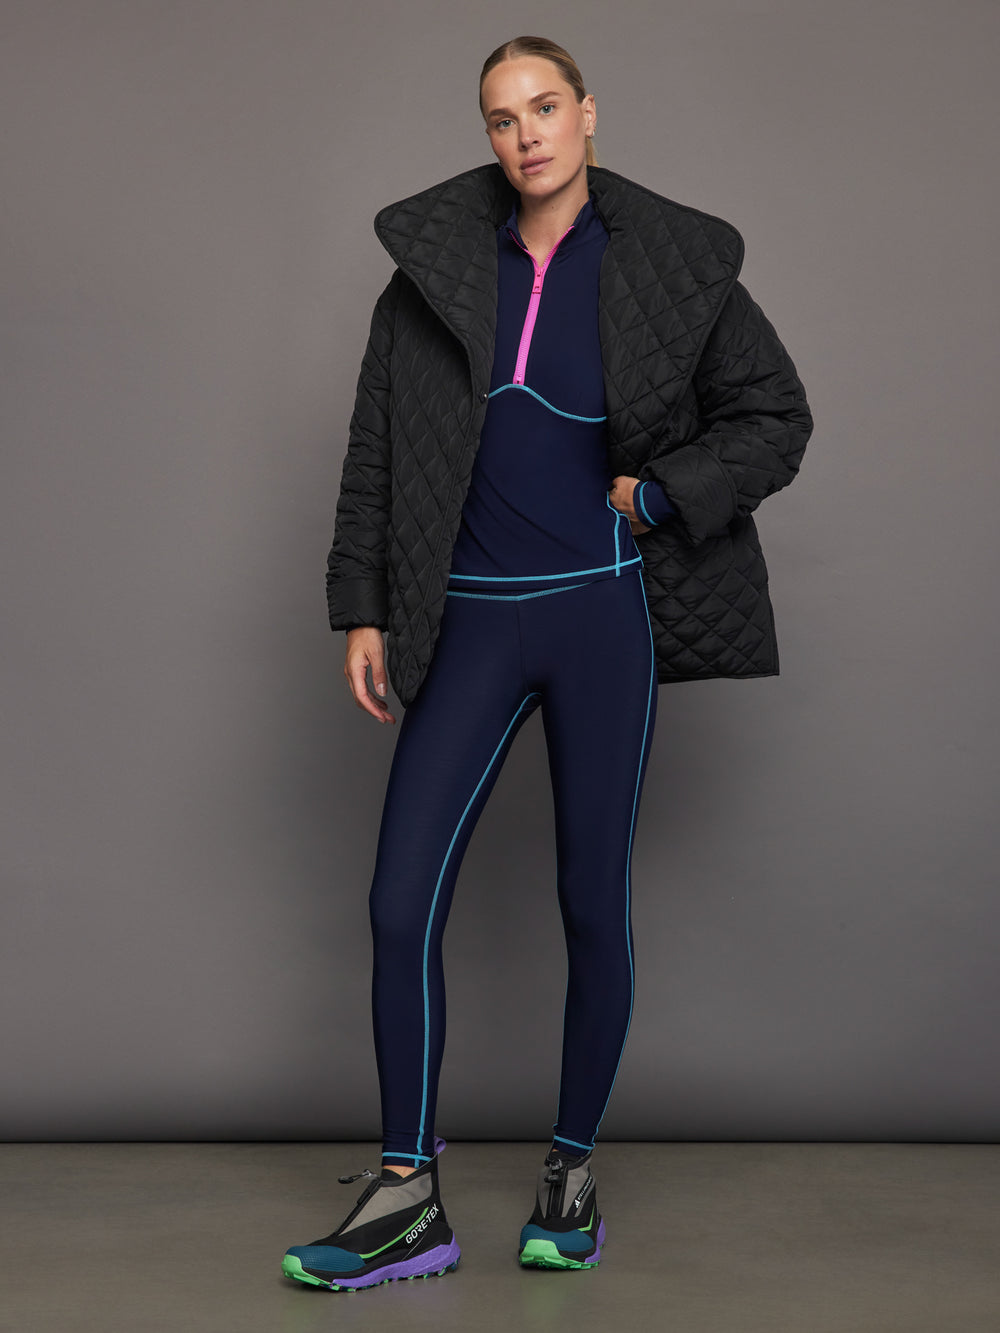 Carbon38 with Navy Blue Rise / Legging – High Atoll - Fleece Back